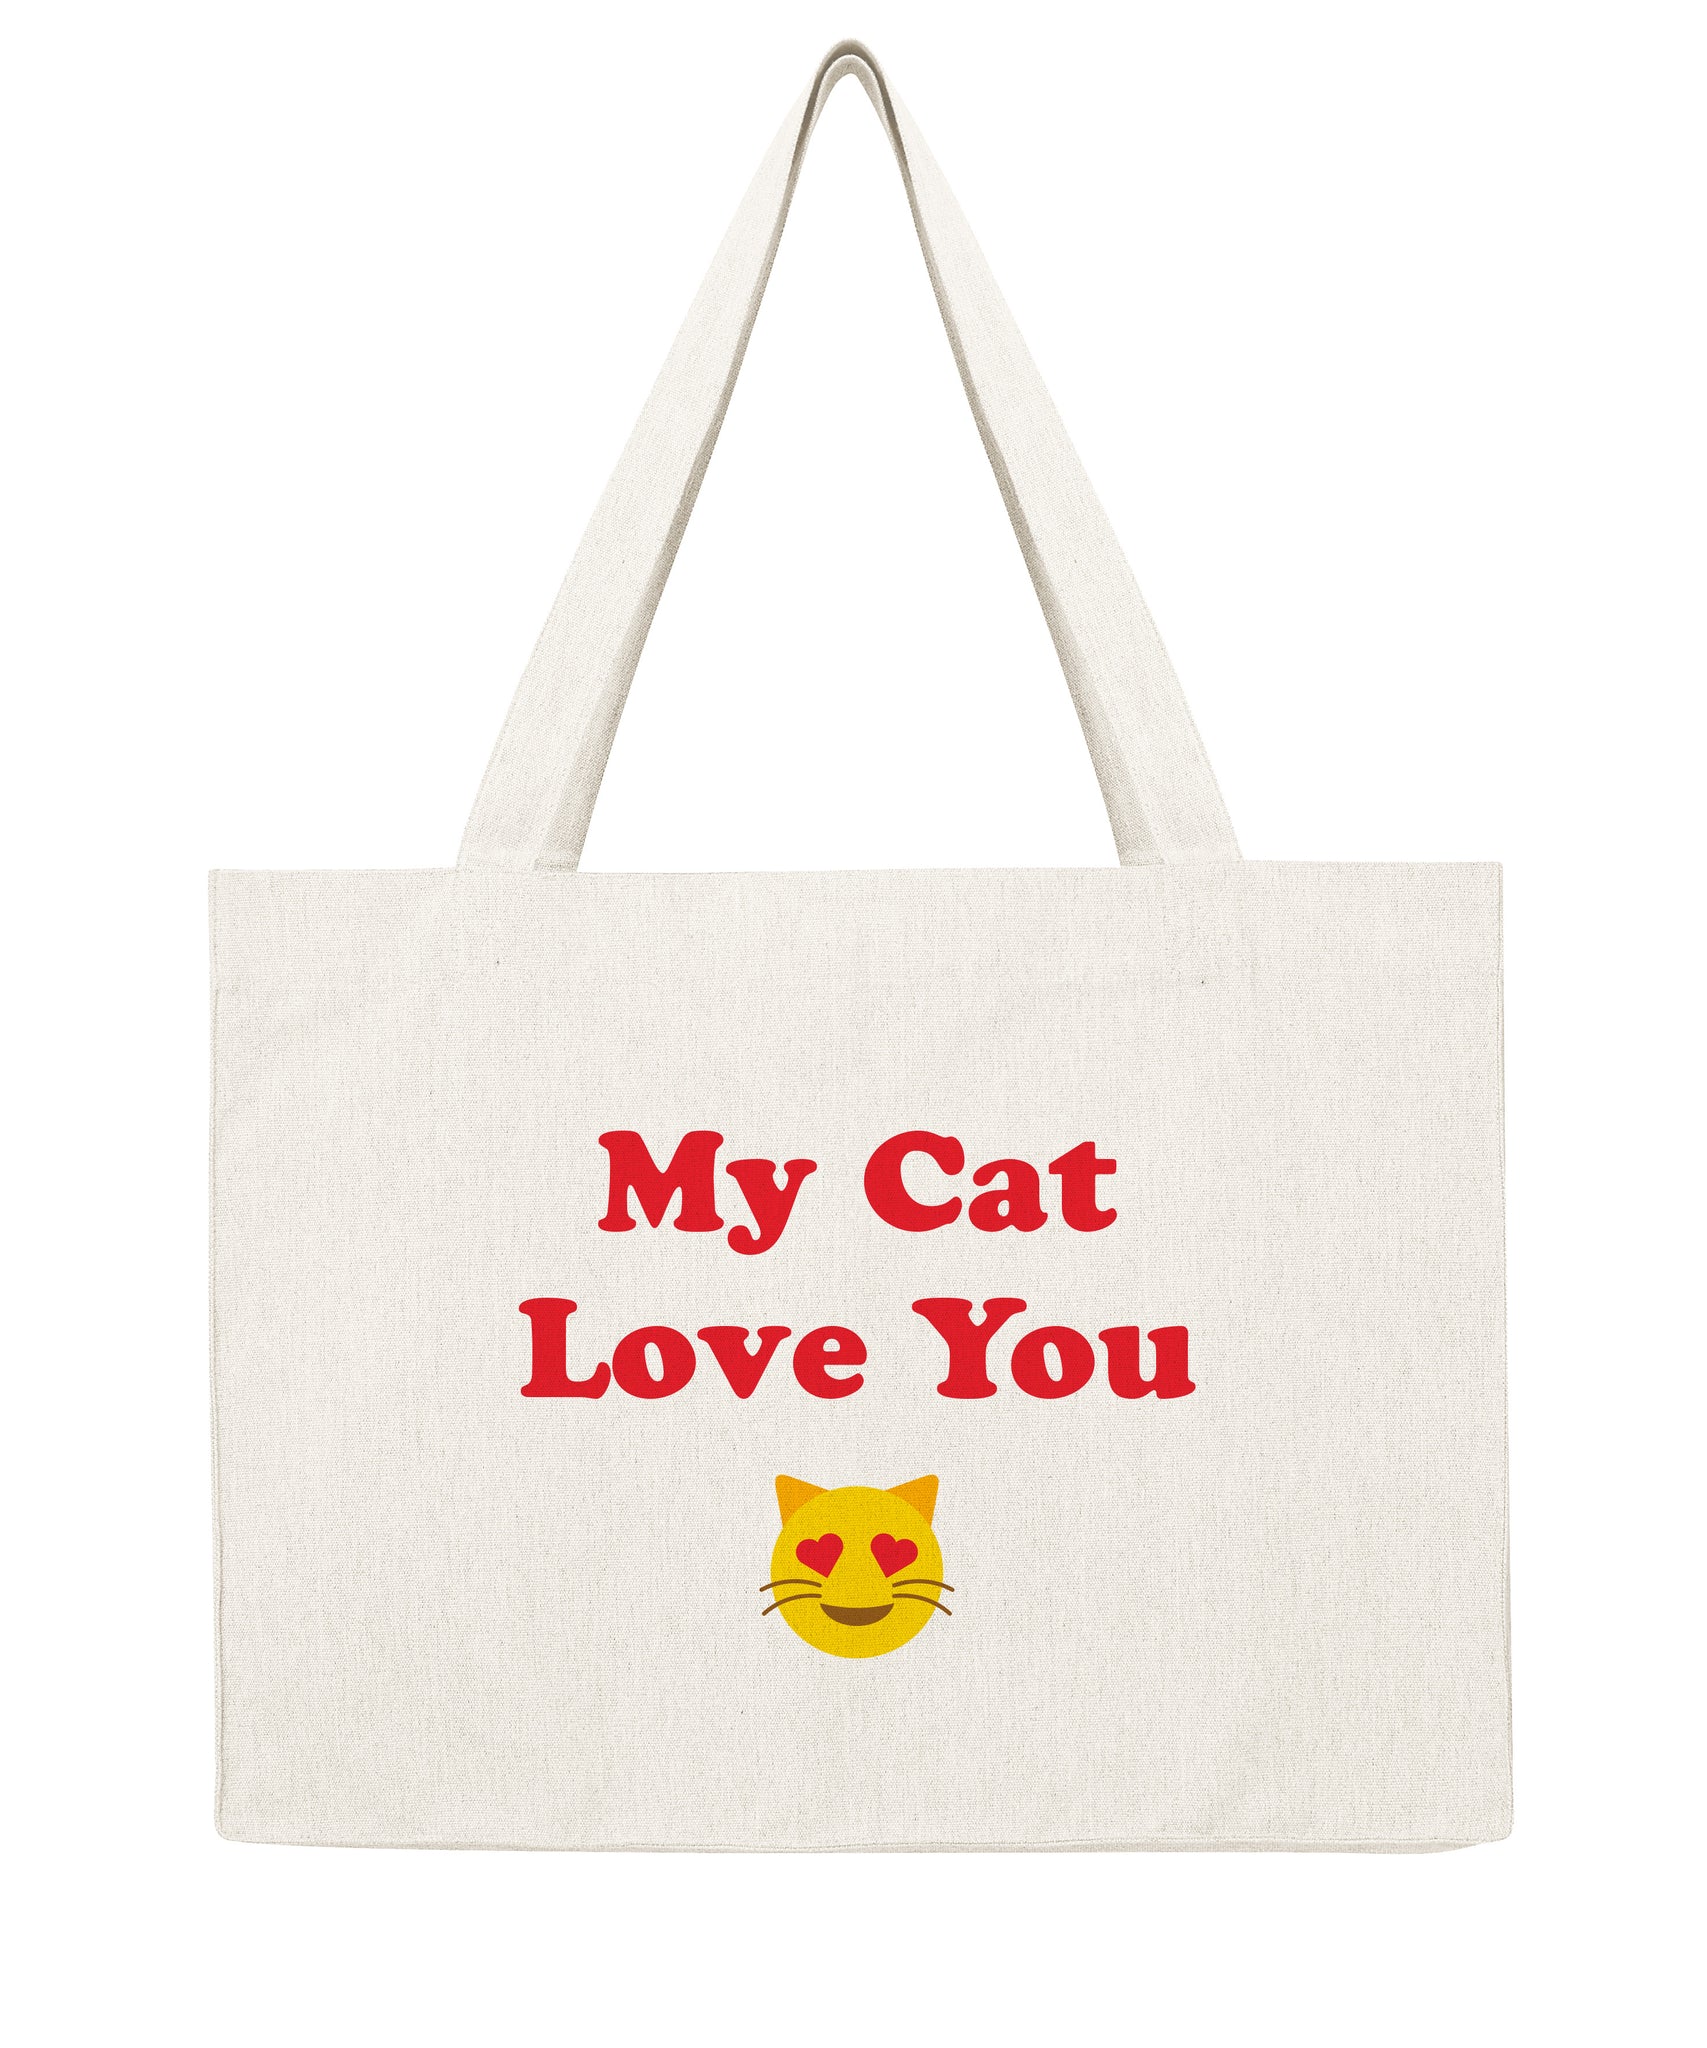 My cat love you - Shopping bag-Sacs-Atelier Amelot